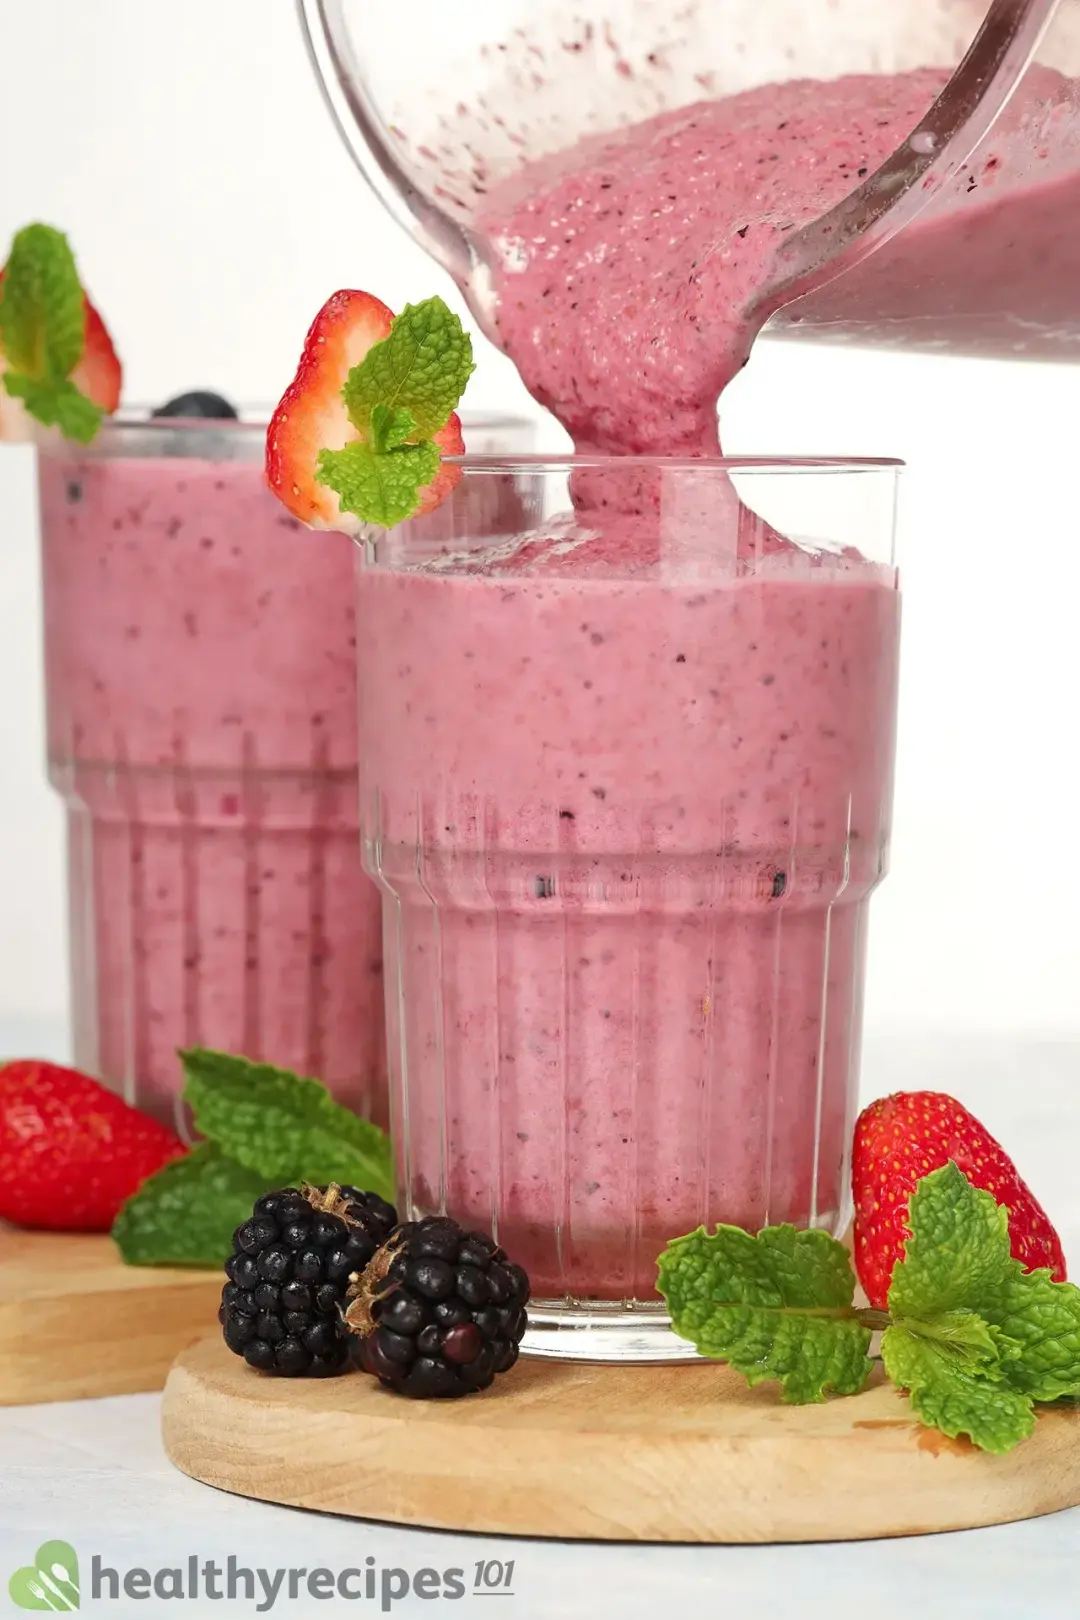 Our Mixed Berry Smoothies Benefits